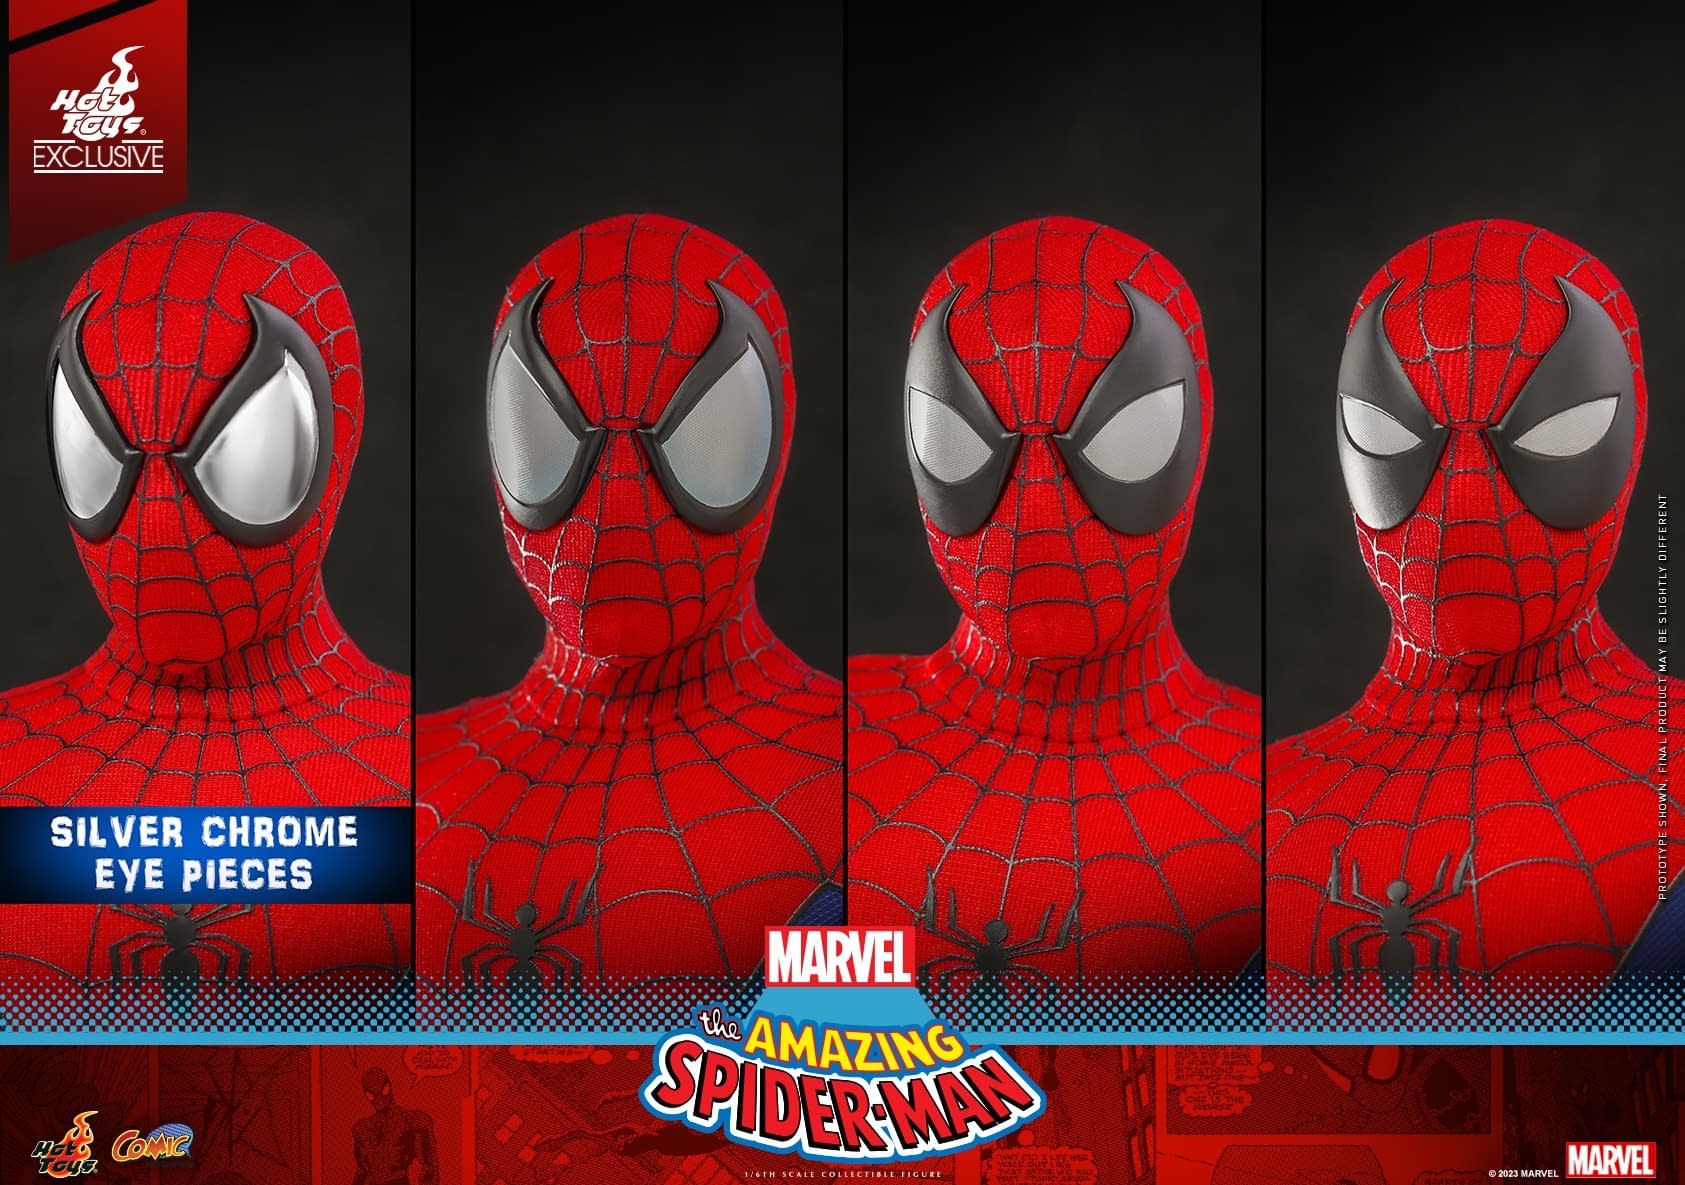 Spider-Man Receives Exclusive Marvel Comics 1/6 Figure from Hot Toys9